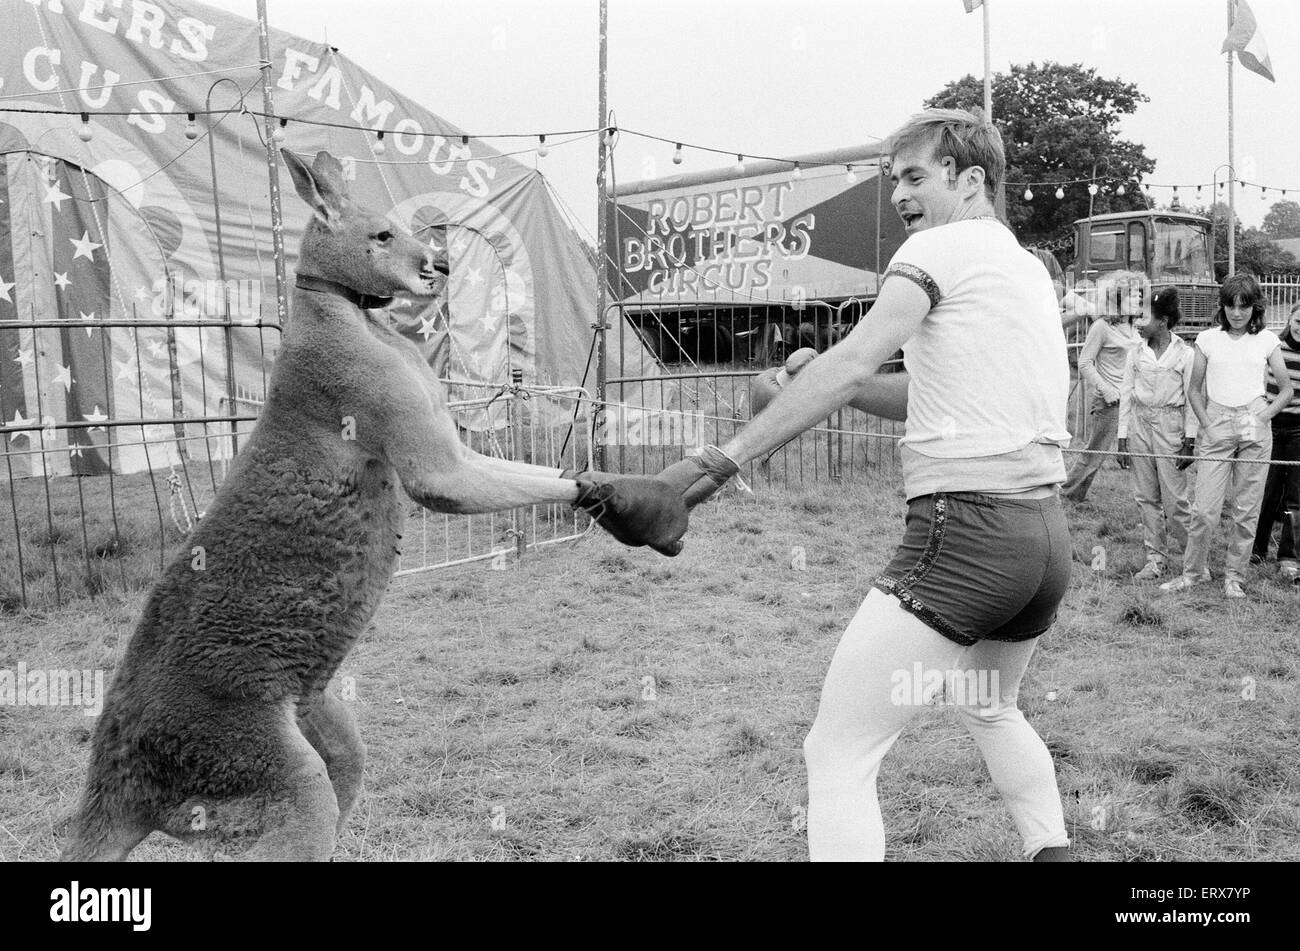 Radio One Disc Jockeys at Robert Brothers Circus in Eastbourne, photo-call for BBC Calendar 1981, taken 14th August 1980. Paul Gambaccini, poses for pictures, boxing with a Kangaroo. Stock Photo